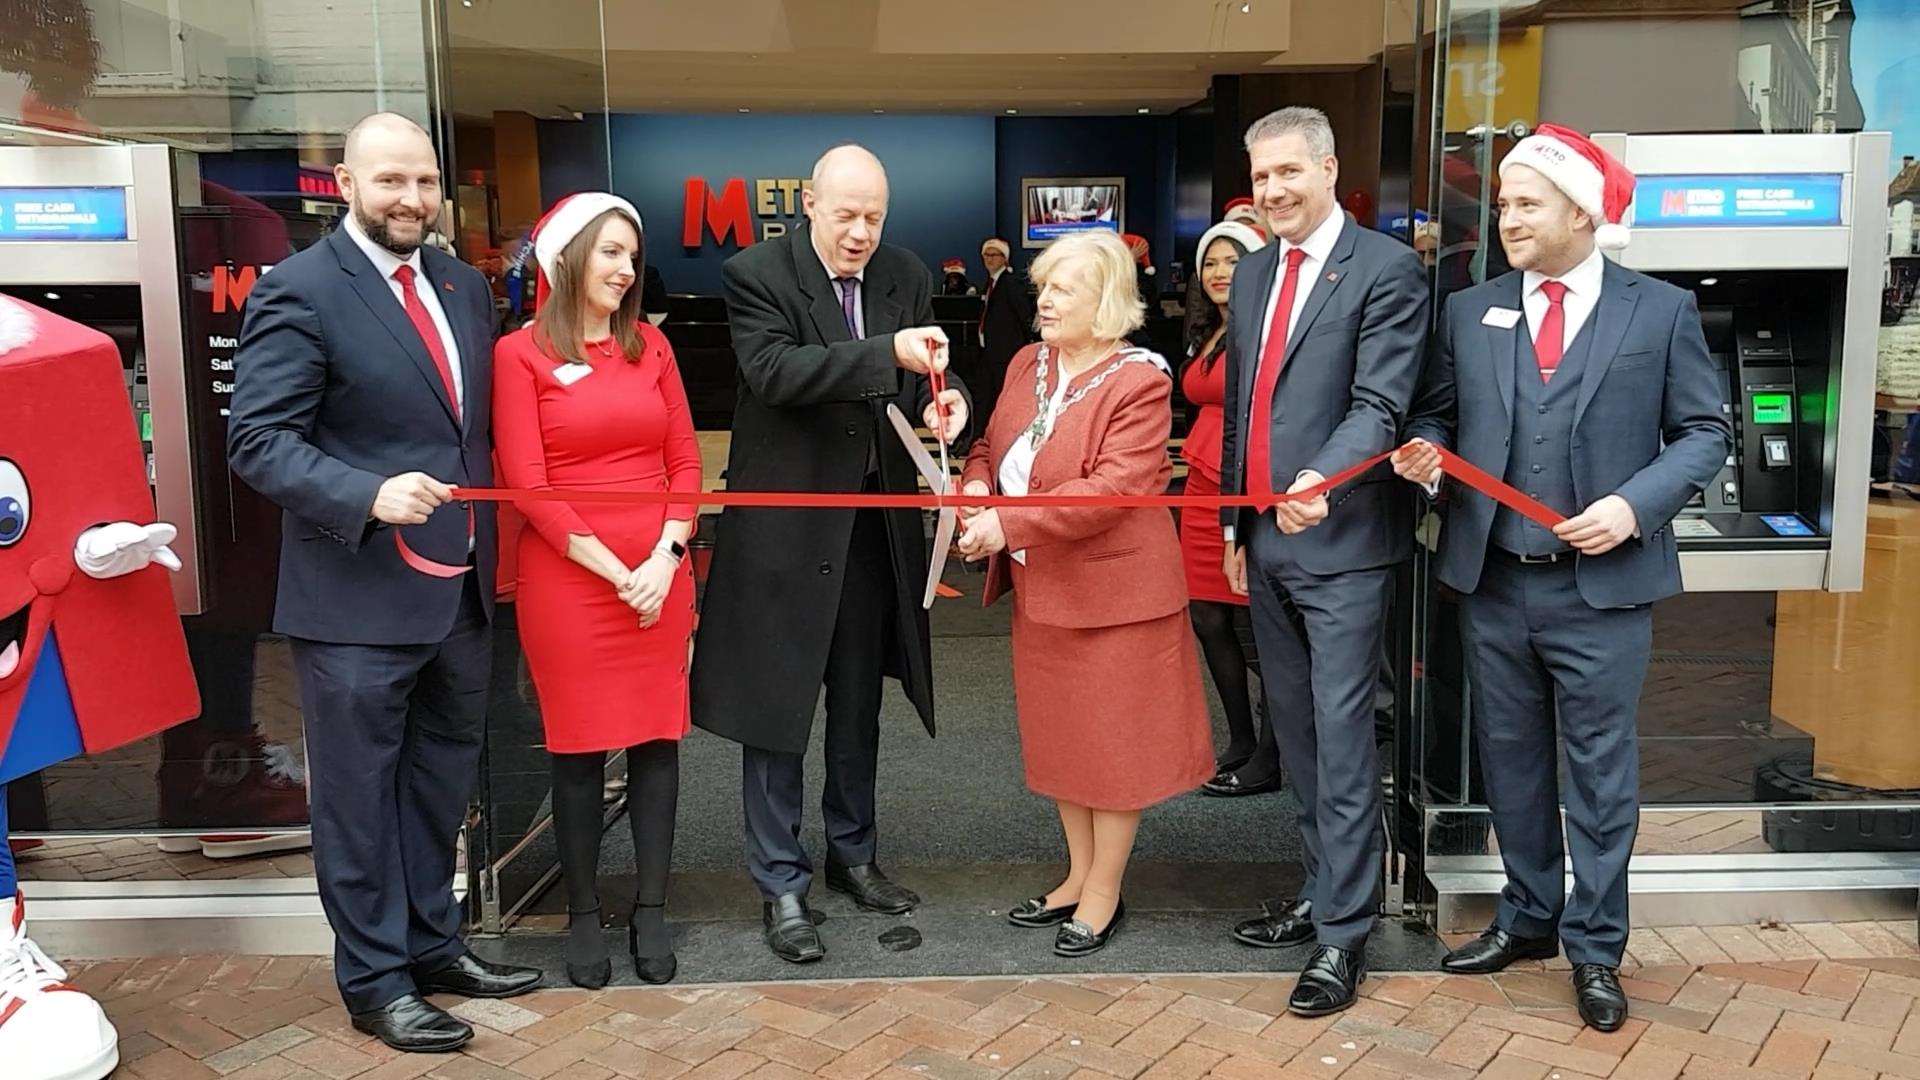 Cutting the ribbon. From left to right: Kevin Walker, Metro Bank's regional director; Kerri Miller, Metro Bank's local director, Rt Hon Damian Green MP, Ashford Mayor Cllr Jessamy Blanford; Iain Kirkpatrick, managing director of Retail Banking for Metro Bank; Daniel Shade, the banks's store manager. (6174311)